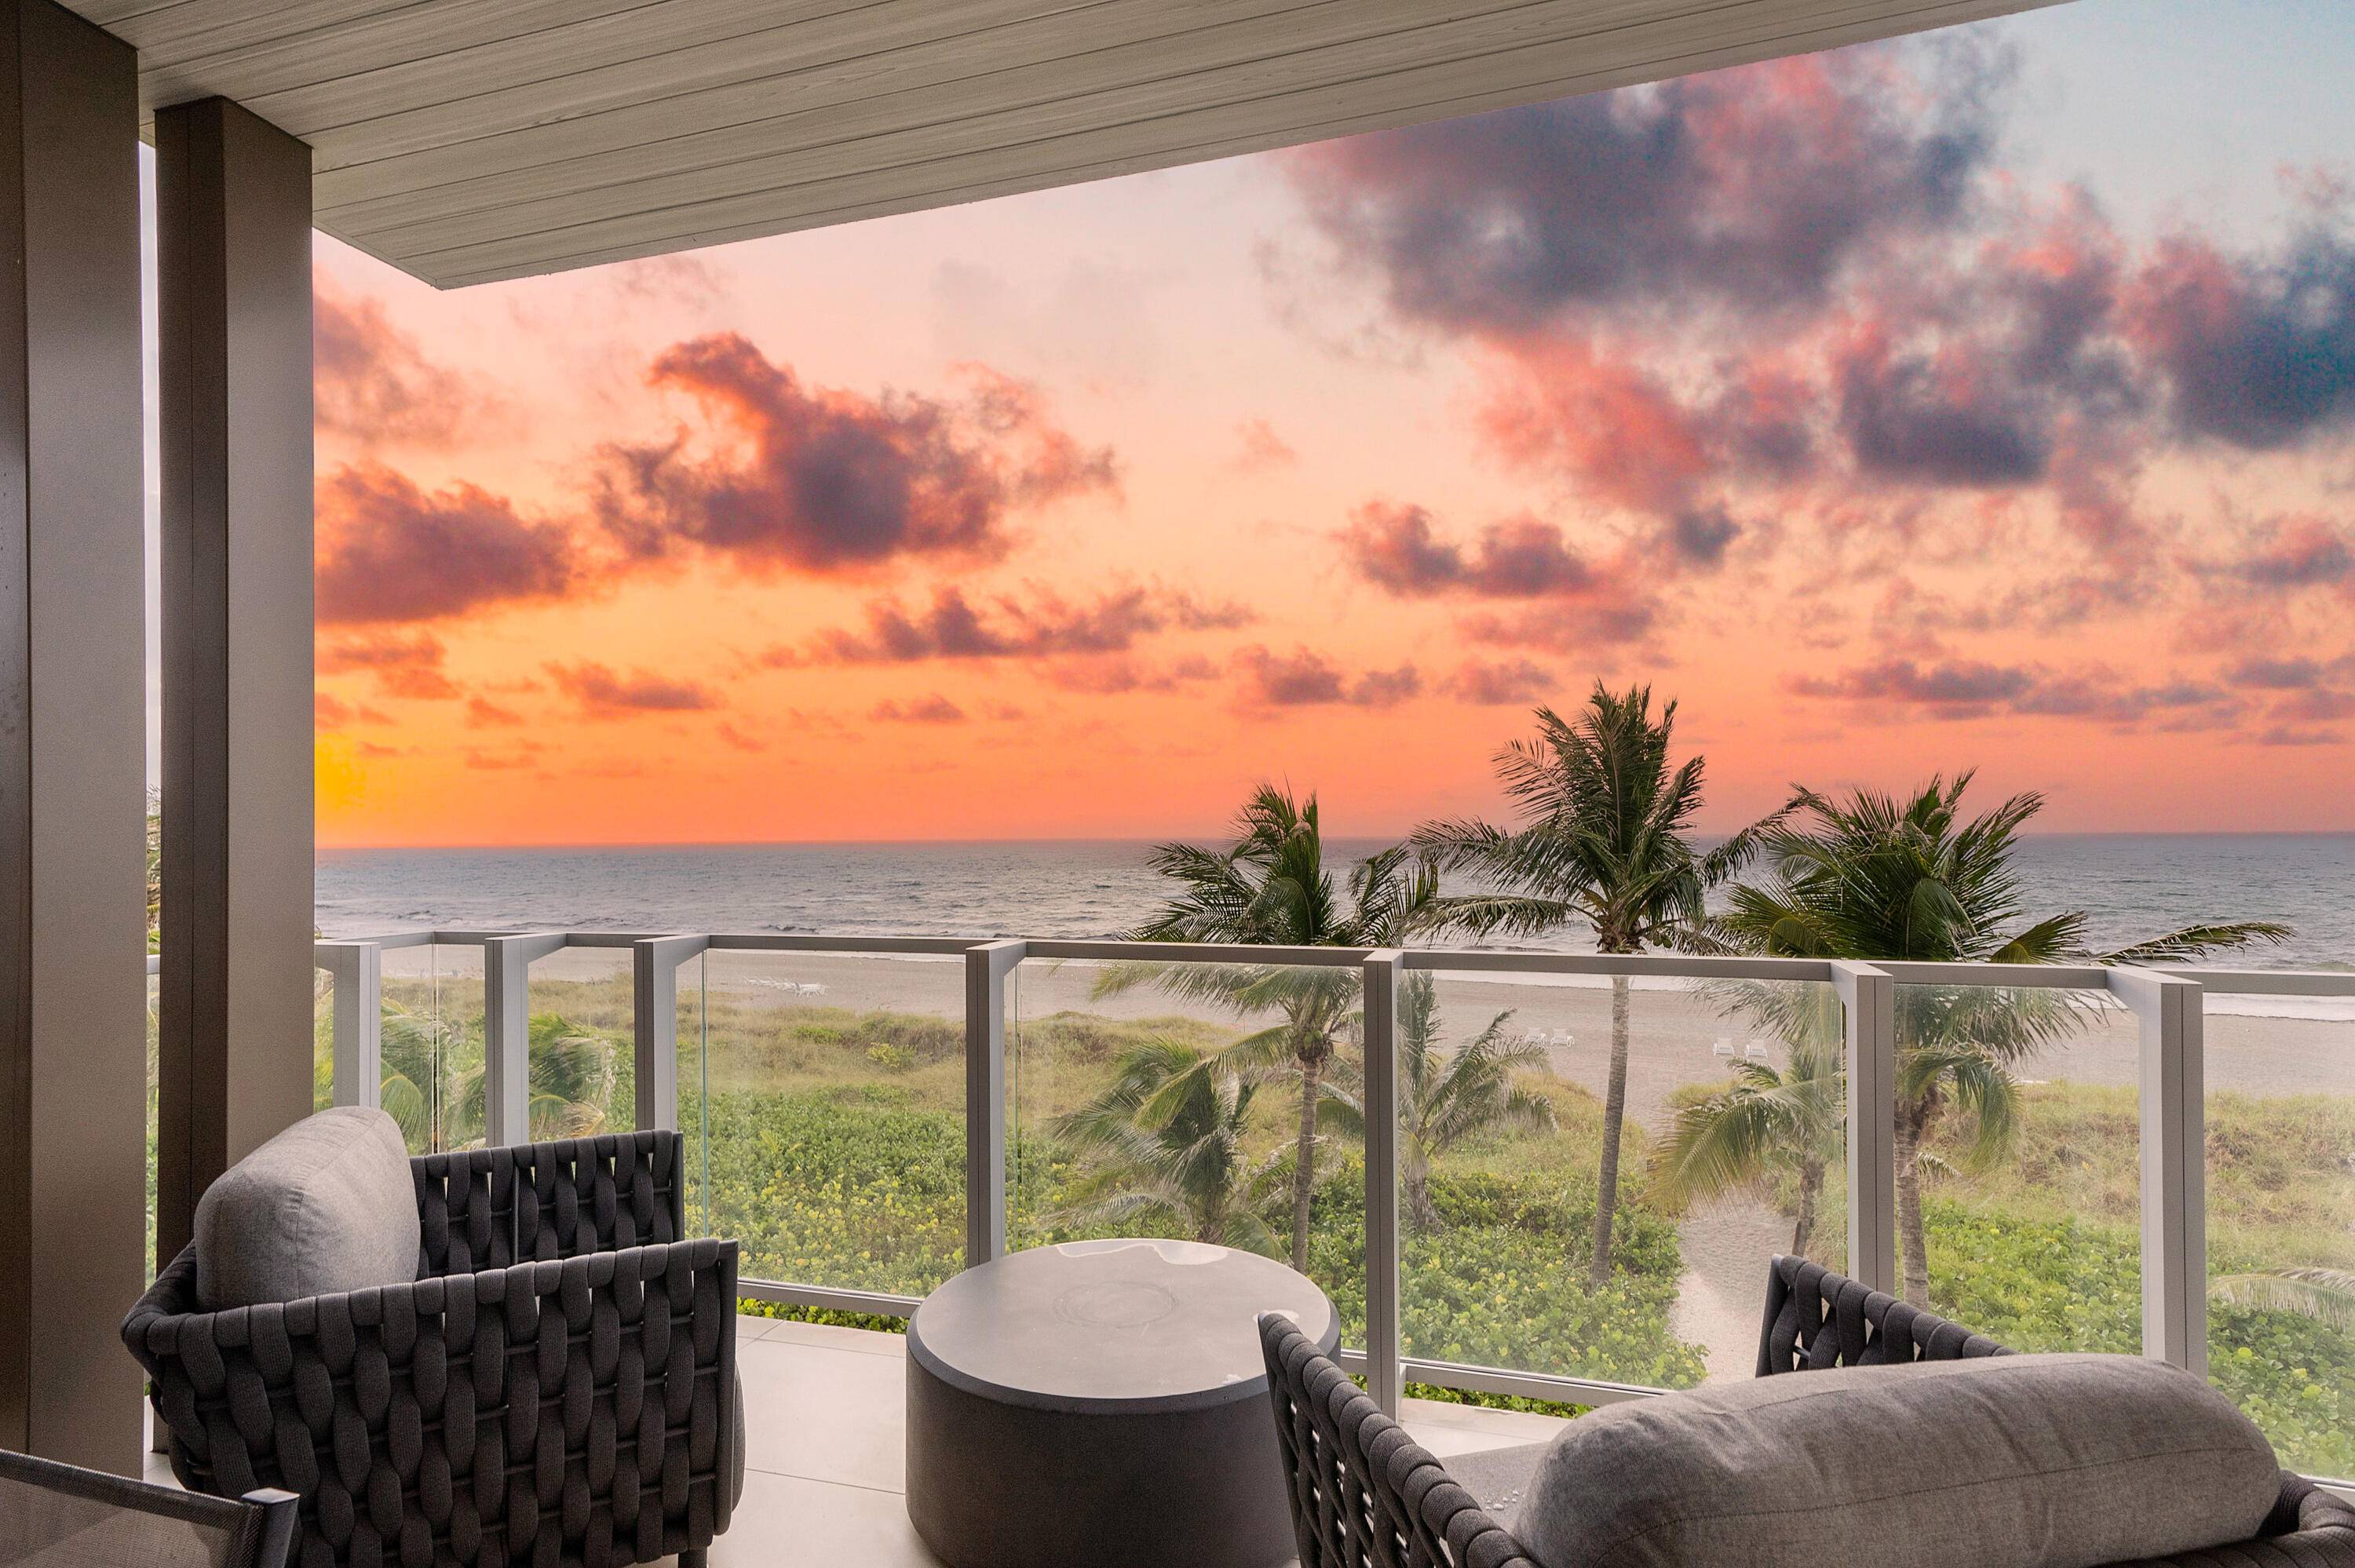 Welcome to the best Oceanfront Penthouse in East Delray, nestled on more than 200 feet of private shoreline.